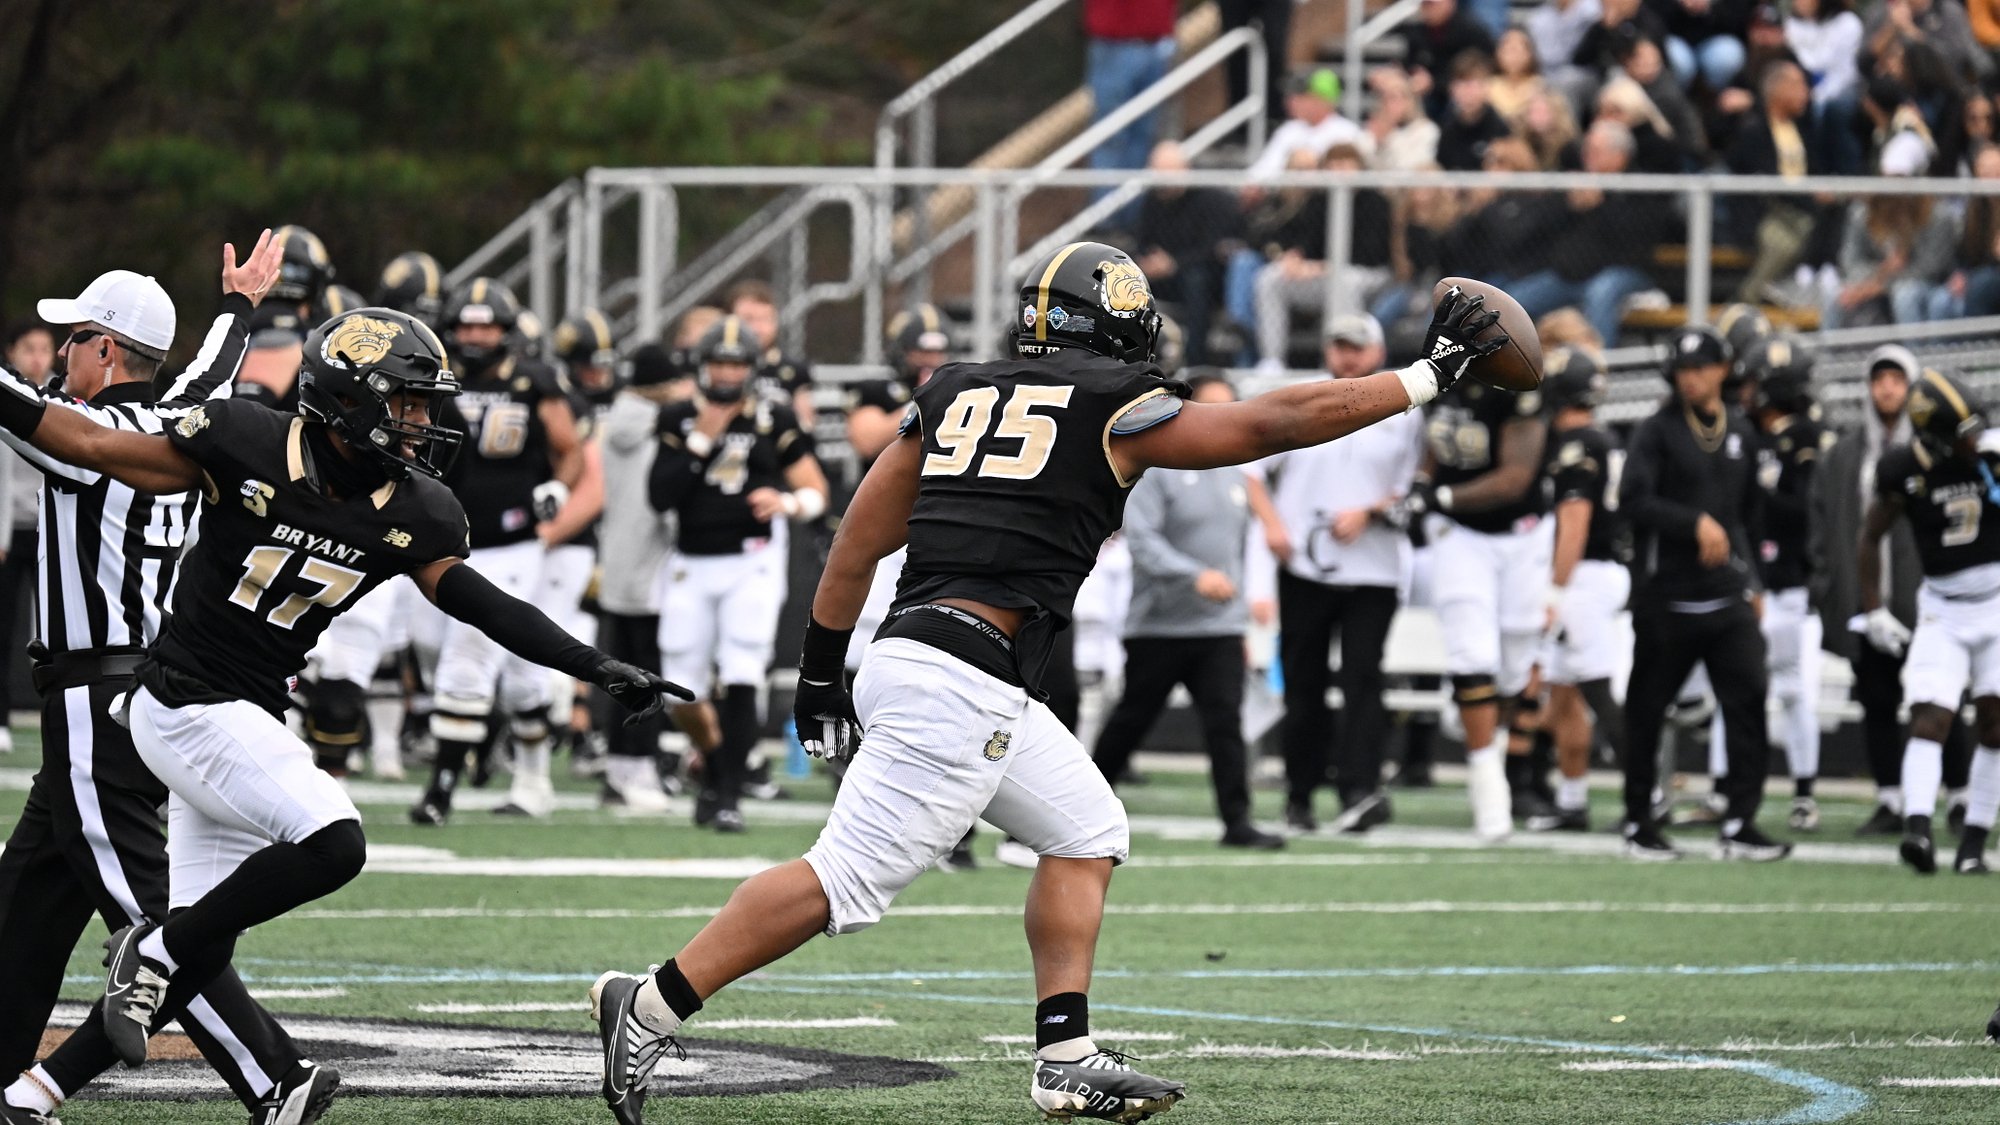 Bryant faces Lindenwood on Saturday afternoon